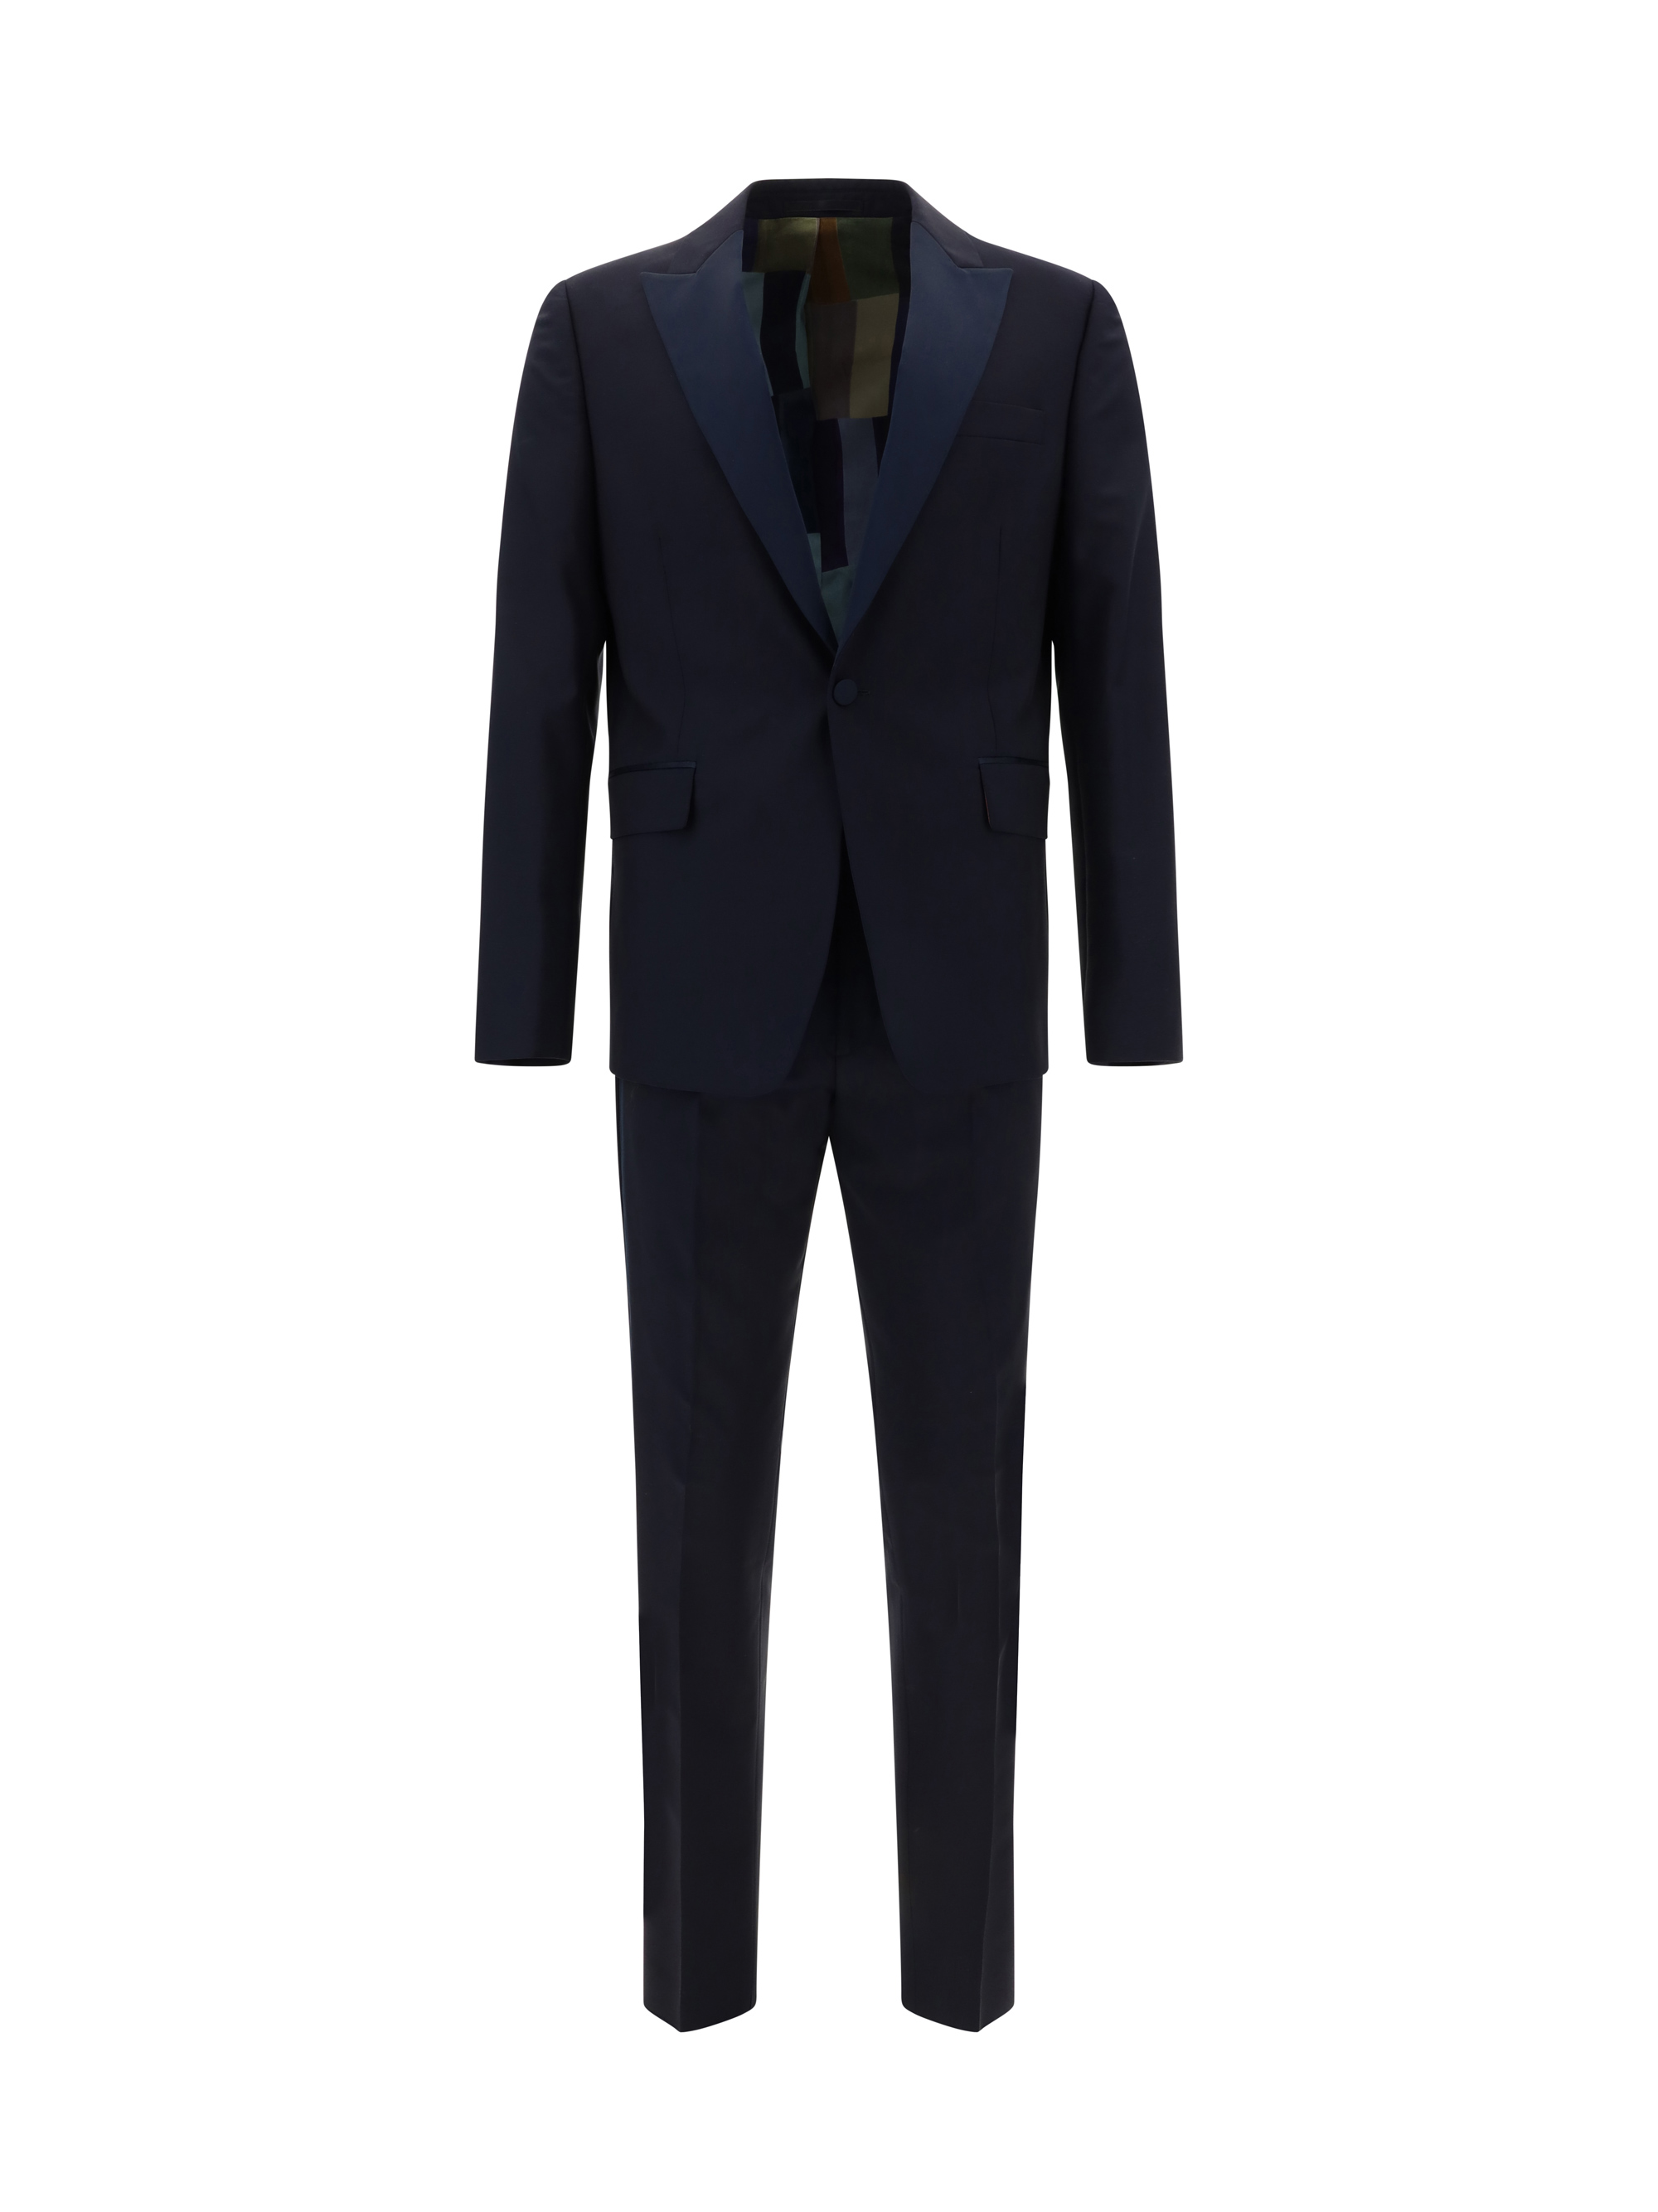 paul smith - tailoring suit